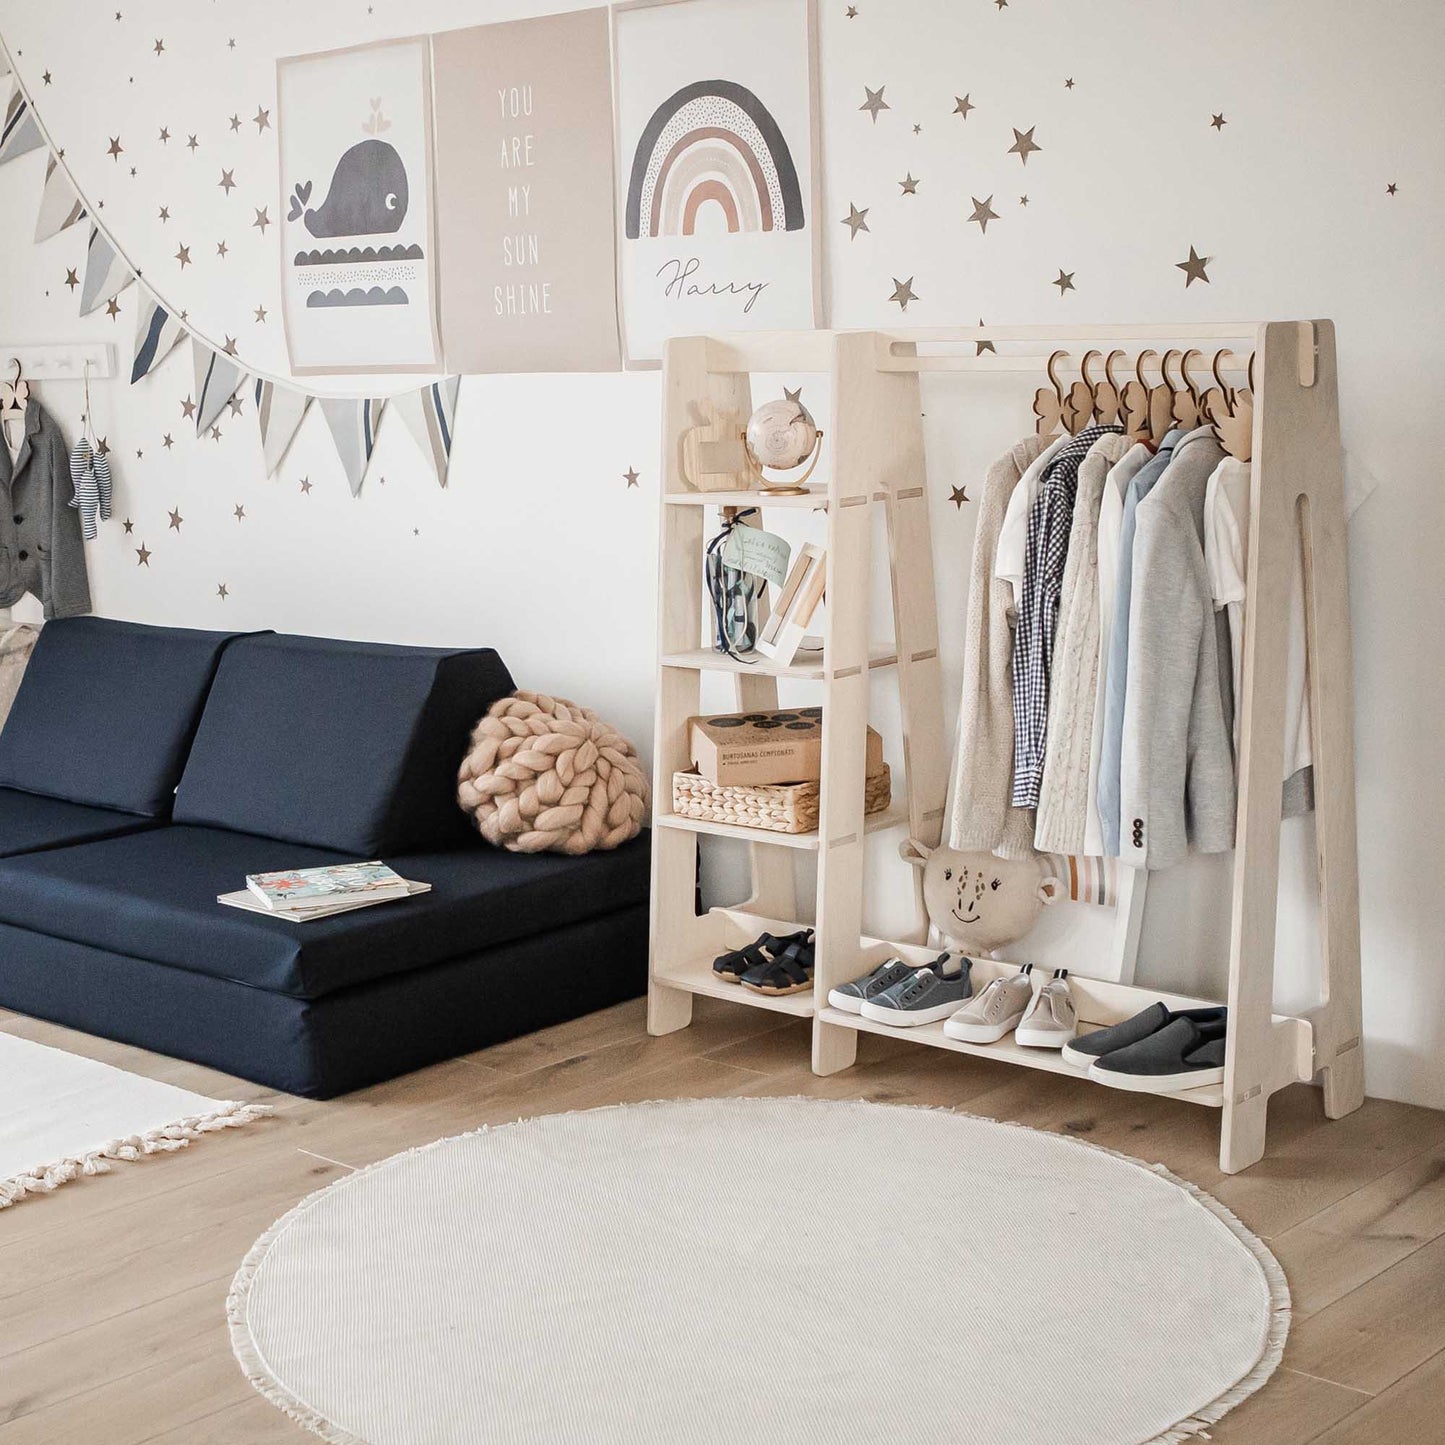 A child's room with a white couch, white walls, and stars on the wall. Additionally, it features a Sweet Home From Wood children's wardrobe for organizing kids' clothing.